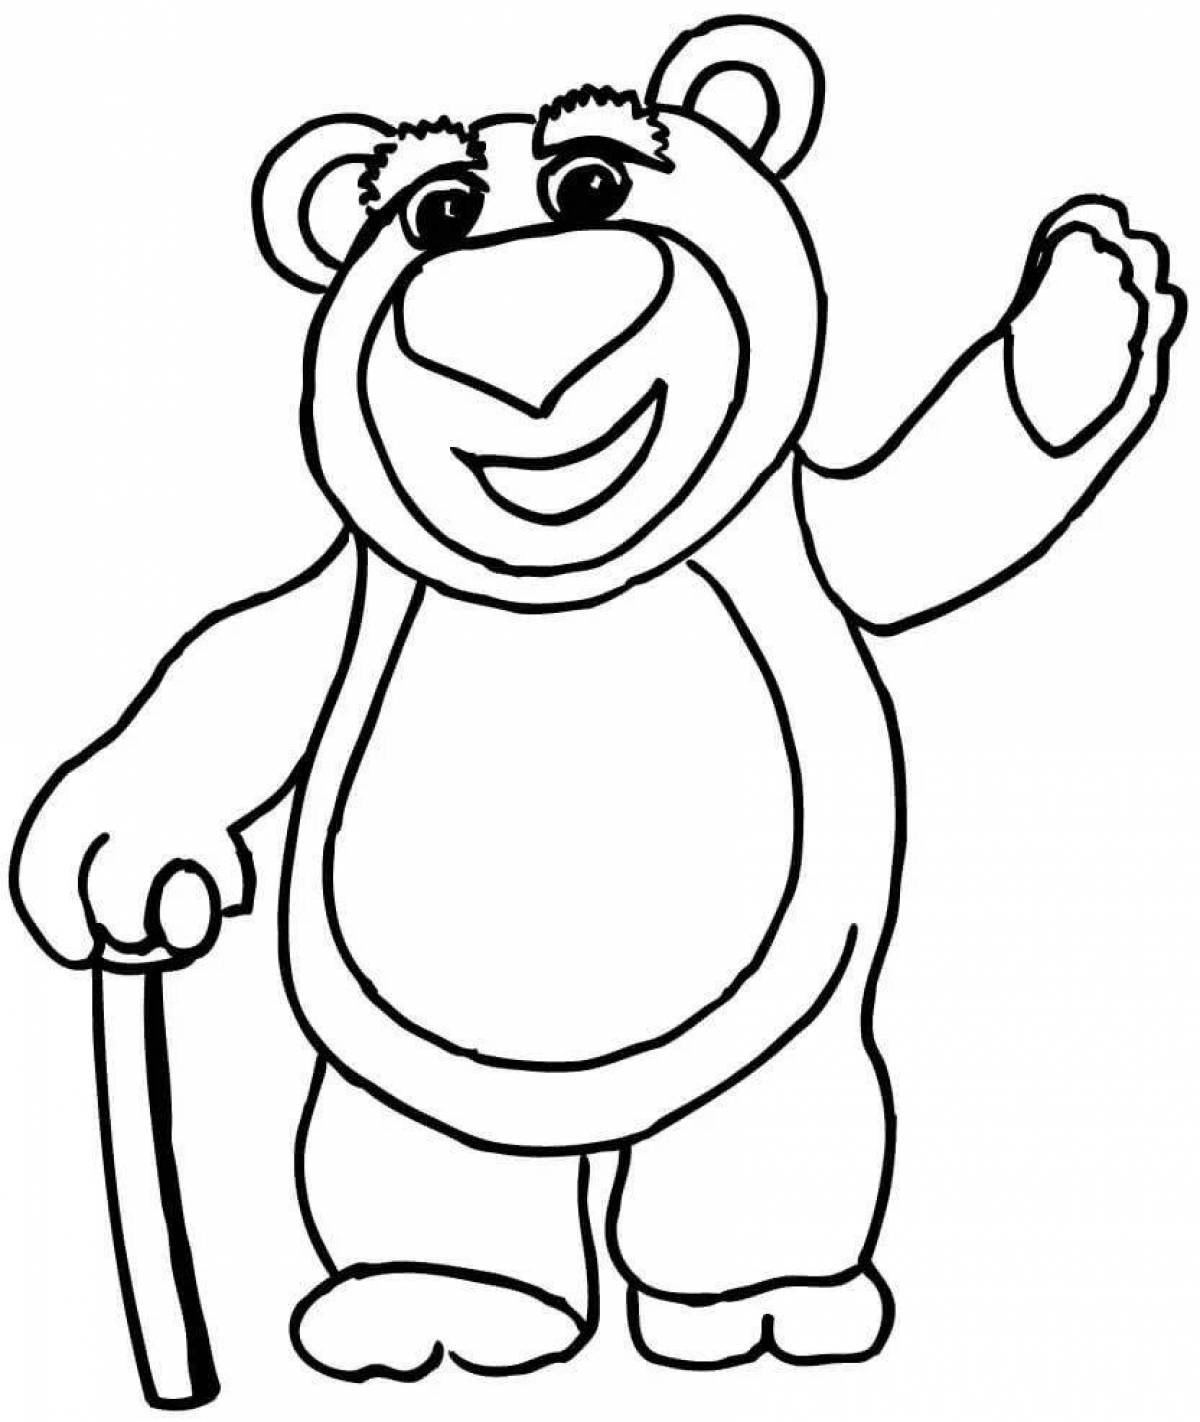 Adorable gummy bear coloring page